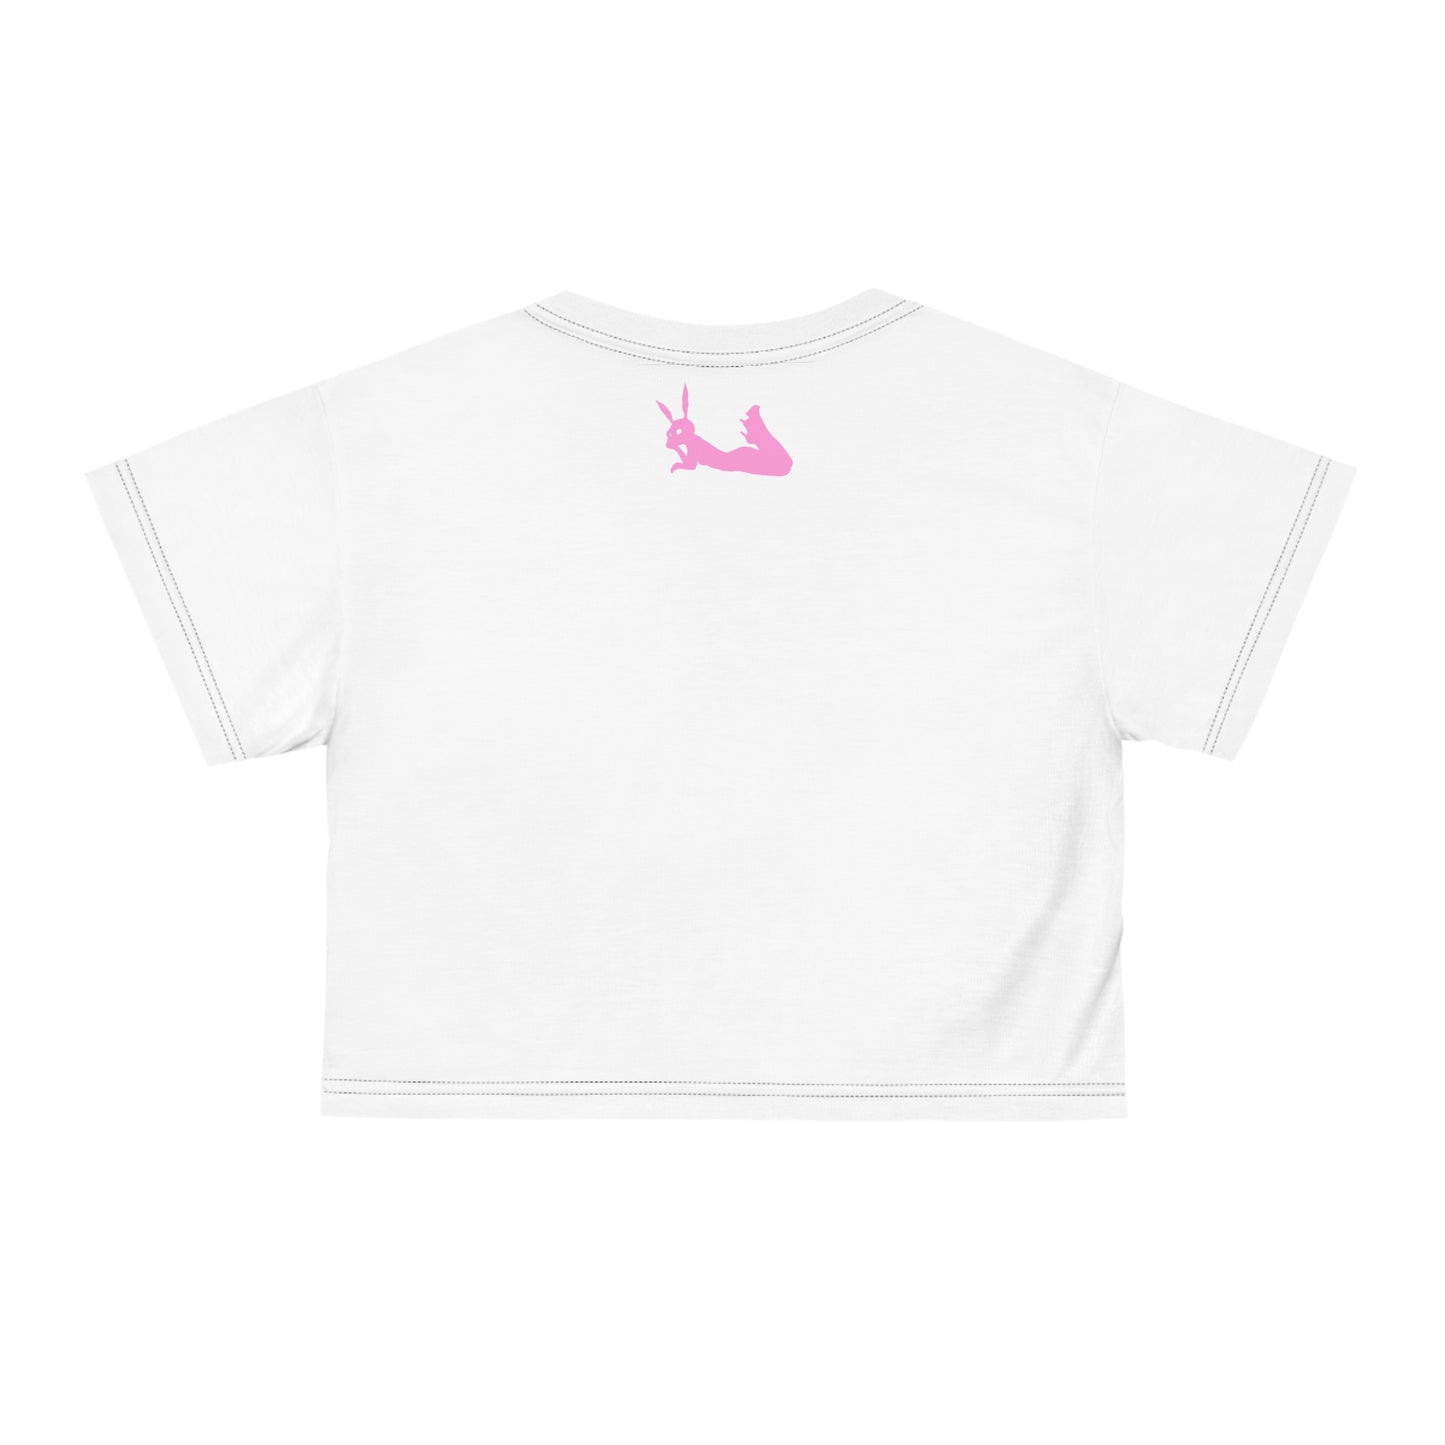 Copy of Copy of  Bunny Girls Love to Win Baby T